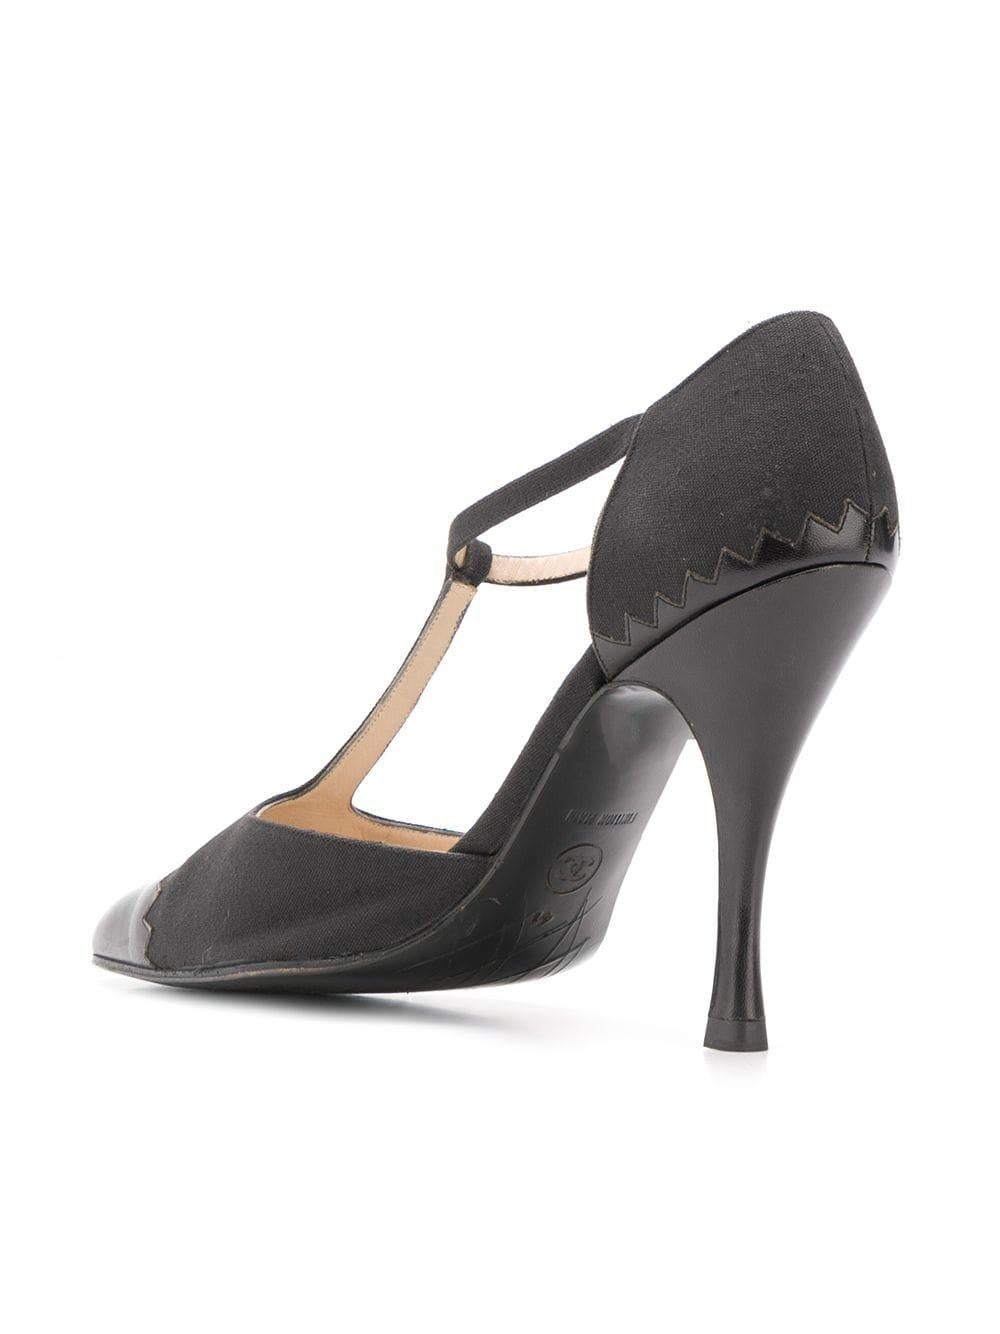 Crafted from a combination of black calf leather and canvas, these vintage pumps by Chanel are for the fashion forward, featuring a 10cm stiletto heel and branded insole, a pointed toe with a T-strap accentuating the front, and an ankle strap